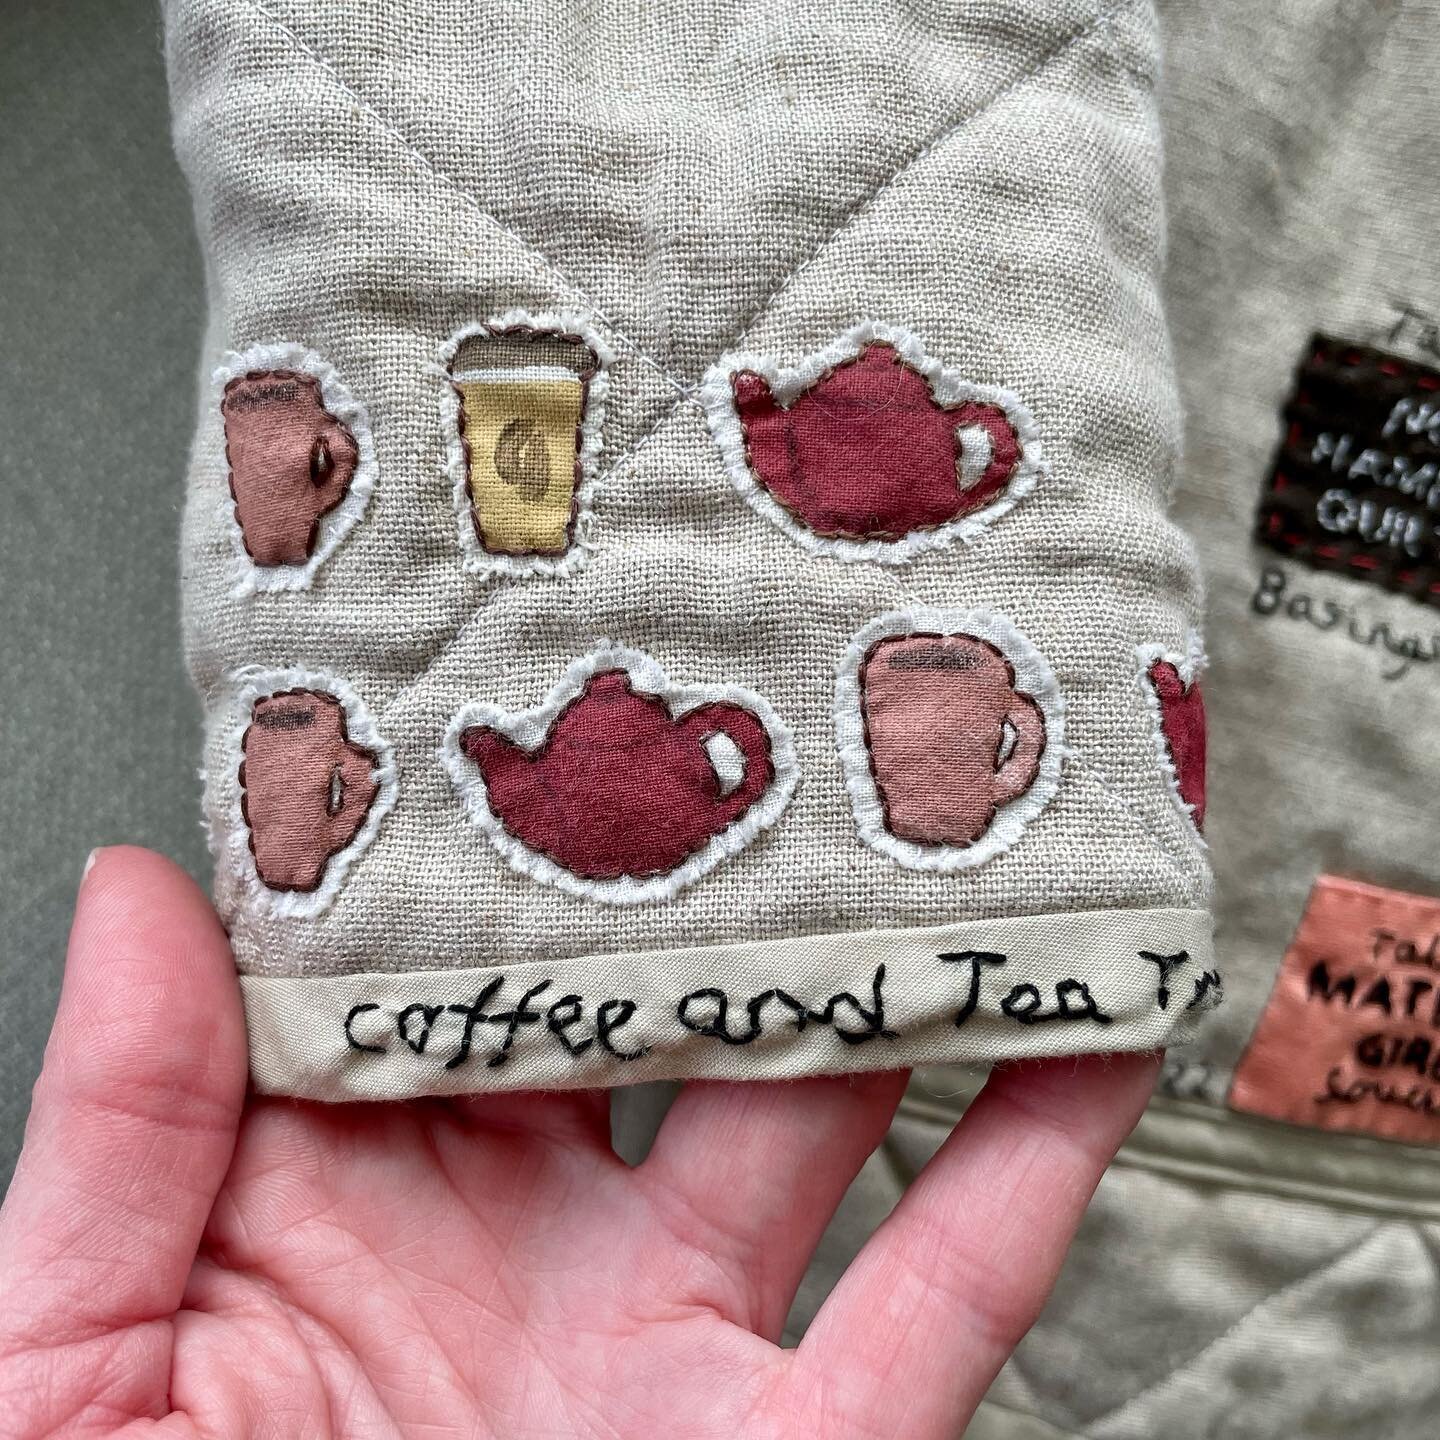 The coffee and tea tracker on my Yackety Jacket is coming along!  This is part of a project to document the experience of my jacket through its life, adding patches and embroidery to record the things I have done while wearing it. Being a bit of a te